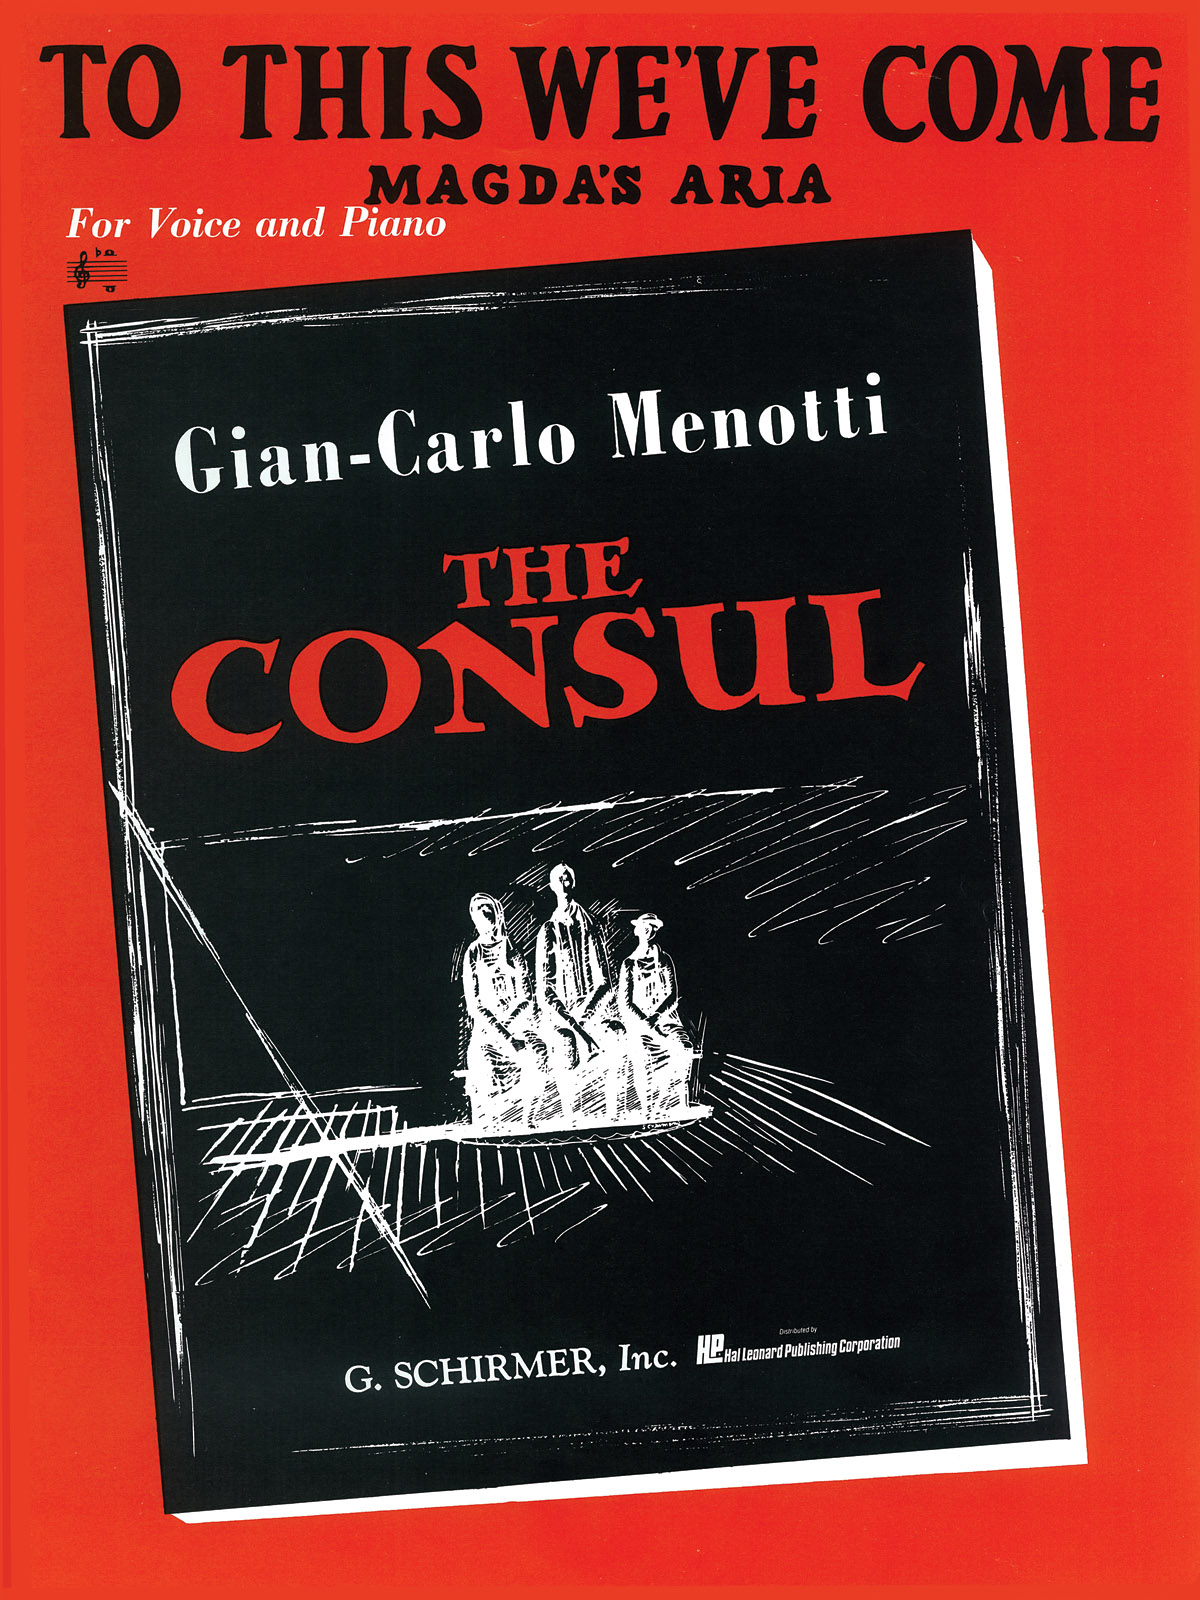 Gian Carlo Menotti: To This We've Come (Magda's Aria): Voice & Piano: Vocal